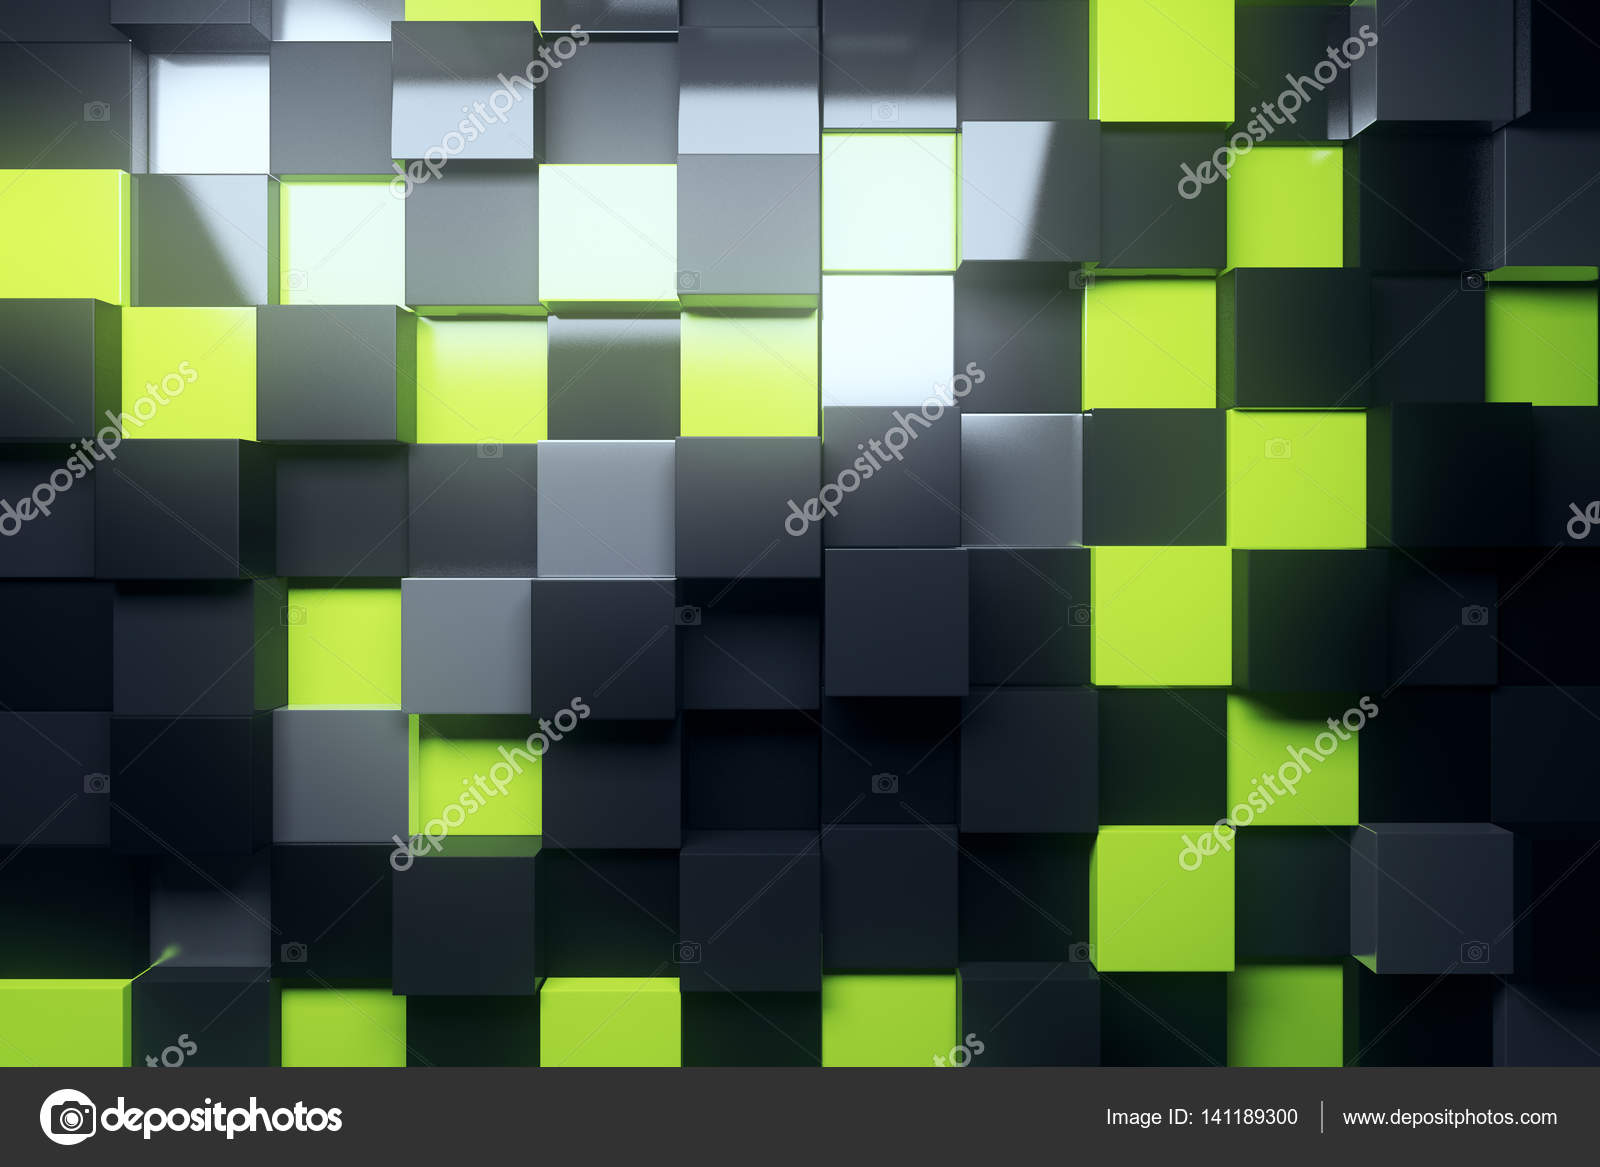 Abstract Green And Black Cubes Wallpaper - Stock Photography , HD Wallpaper & Backgrounds